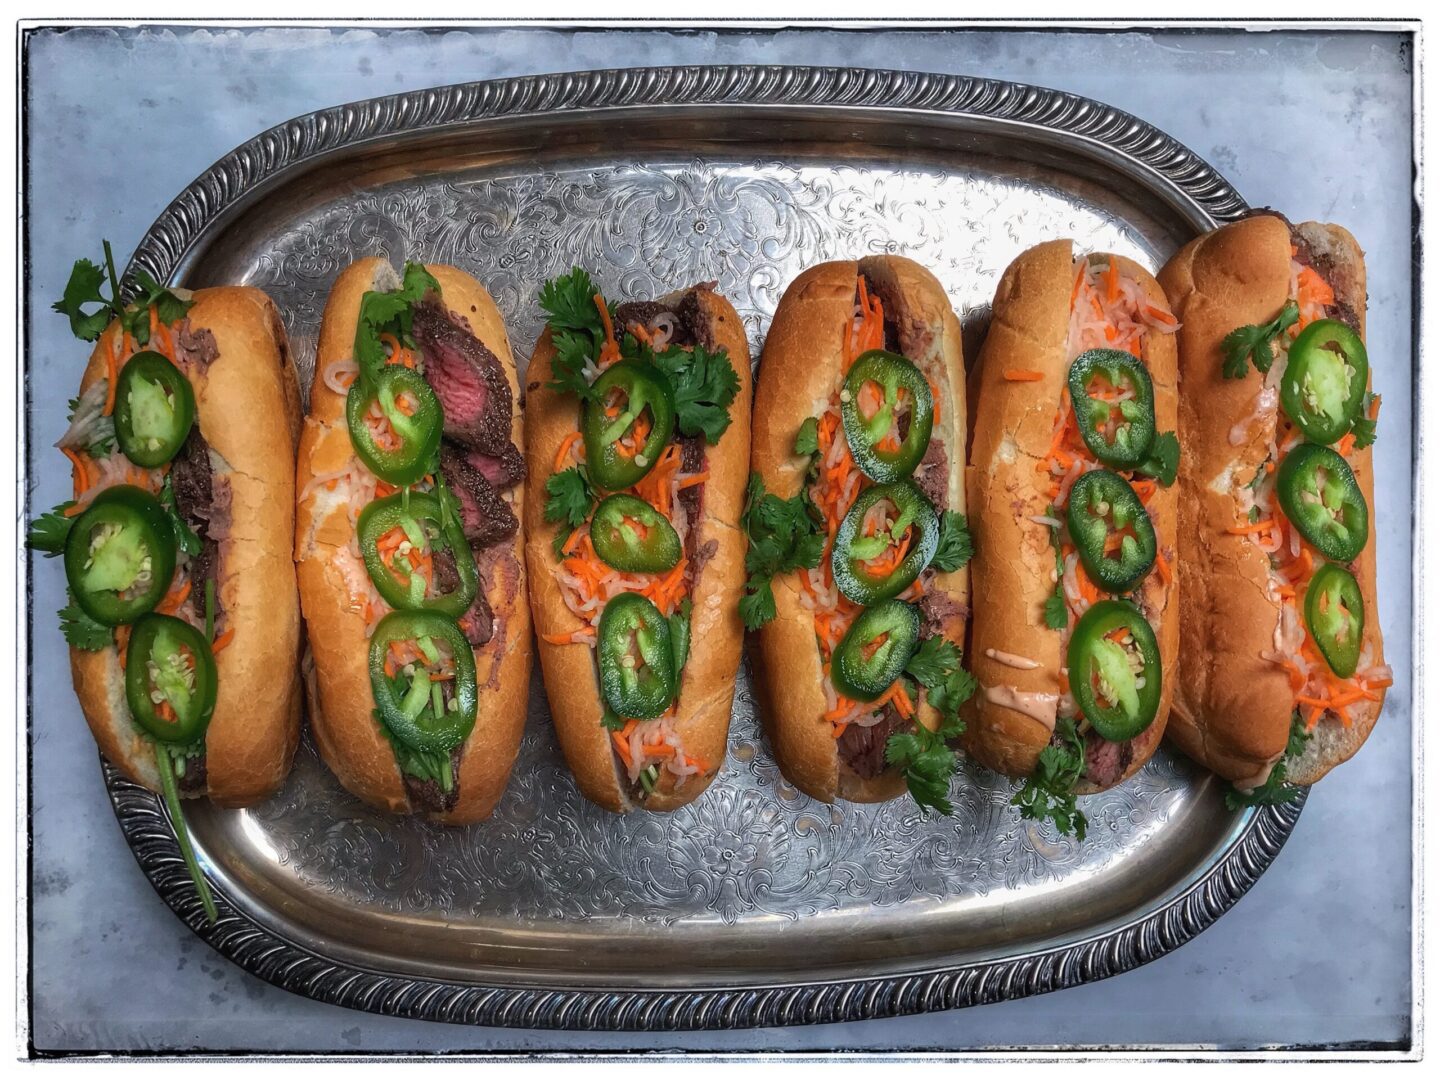 Hot dogs on a tray with jalapenos.